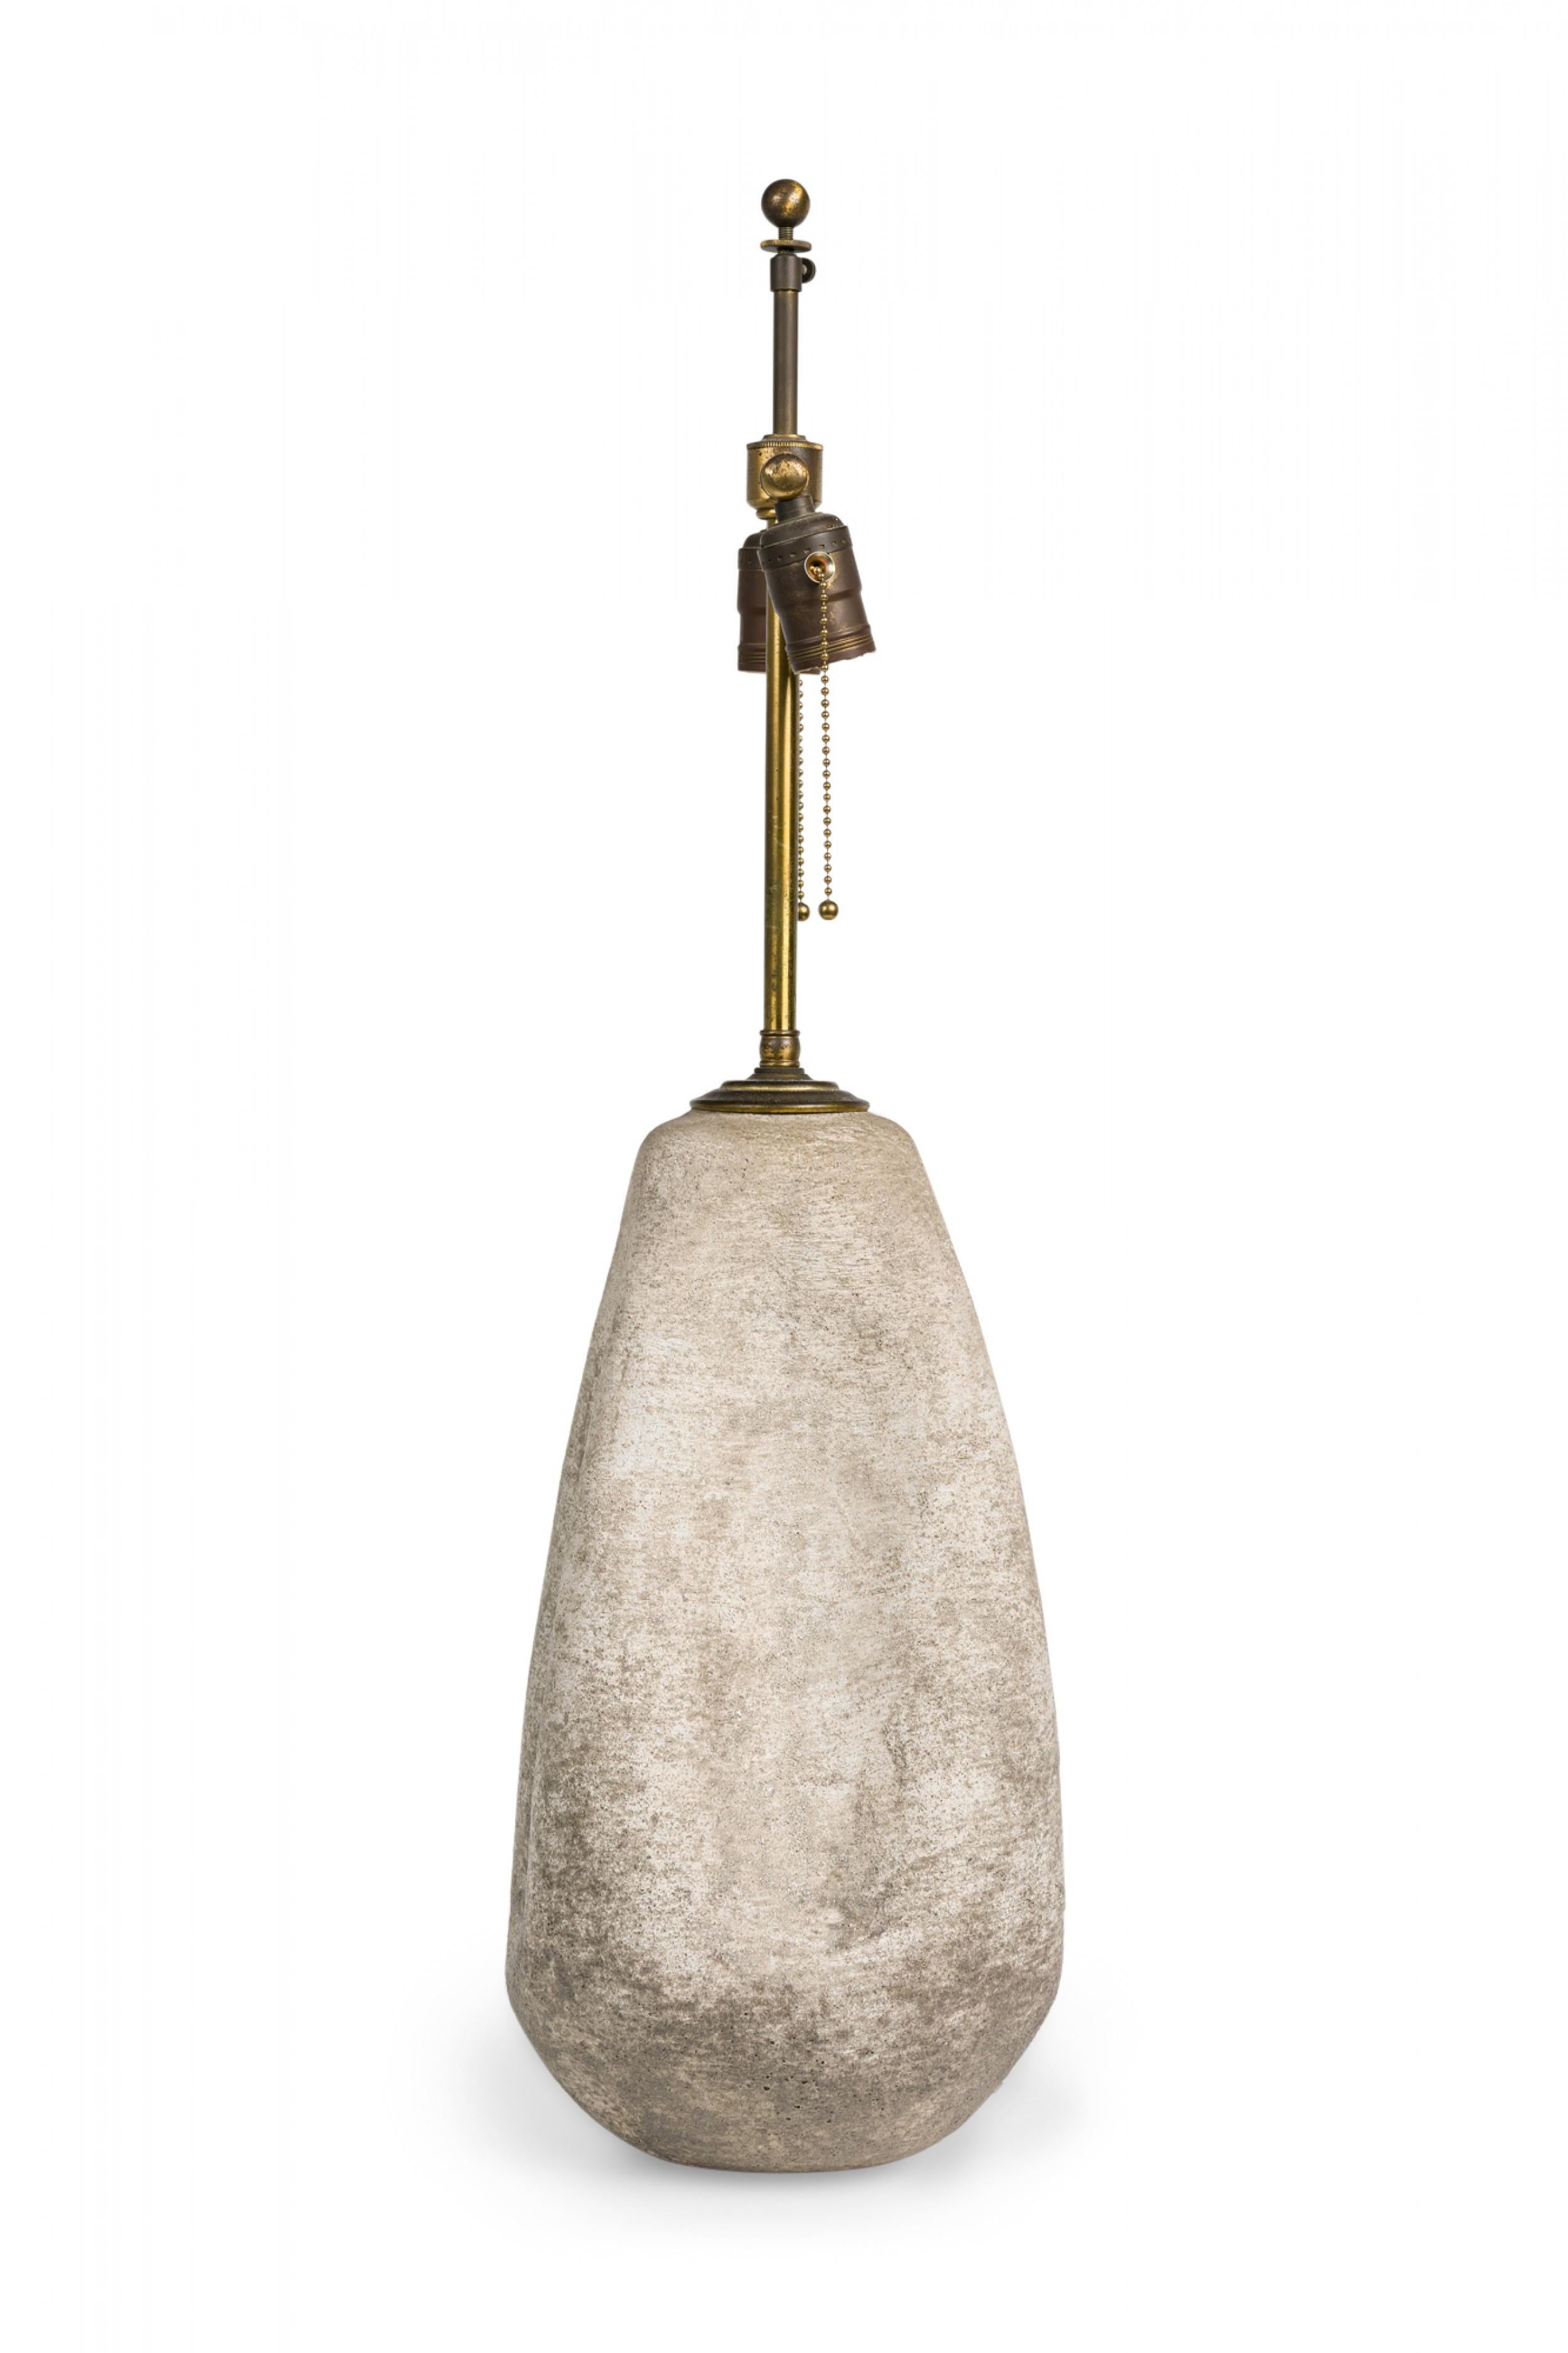 Mid-Century American ceramic table lamp horizontally textured and fired in a white chalk glaze, in pinched tapered gourd form, topped by a brass stem and ball finial, two functioning light sockets with beaded pulls plus an on / off switch attached